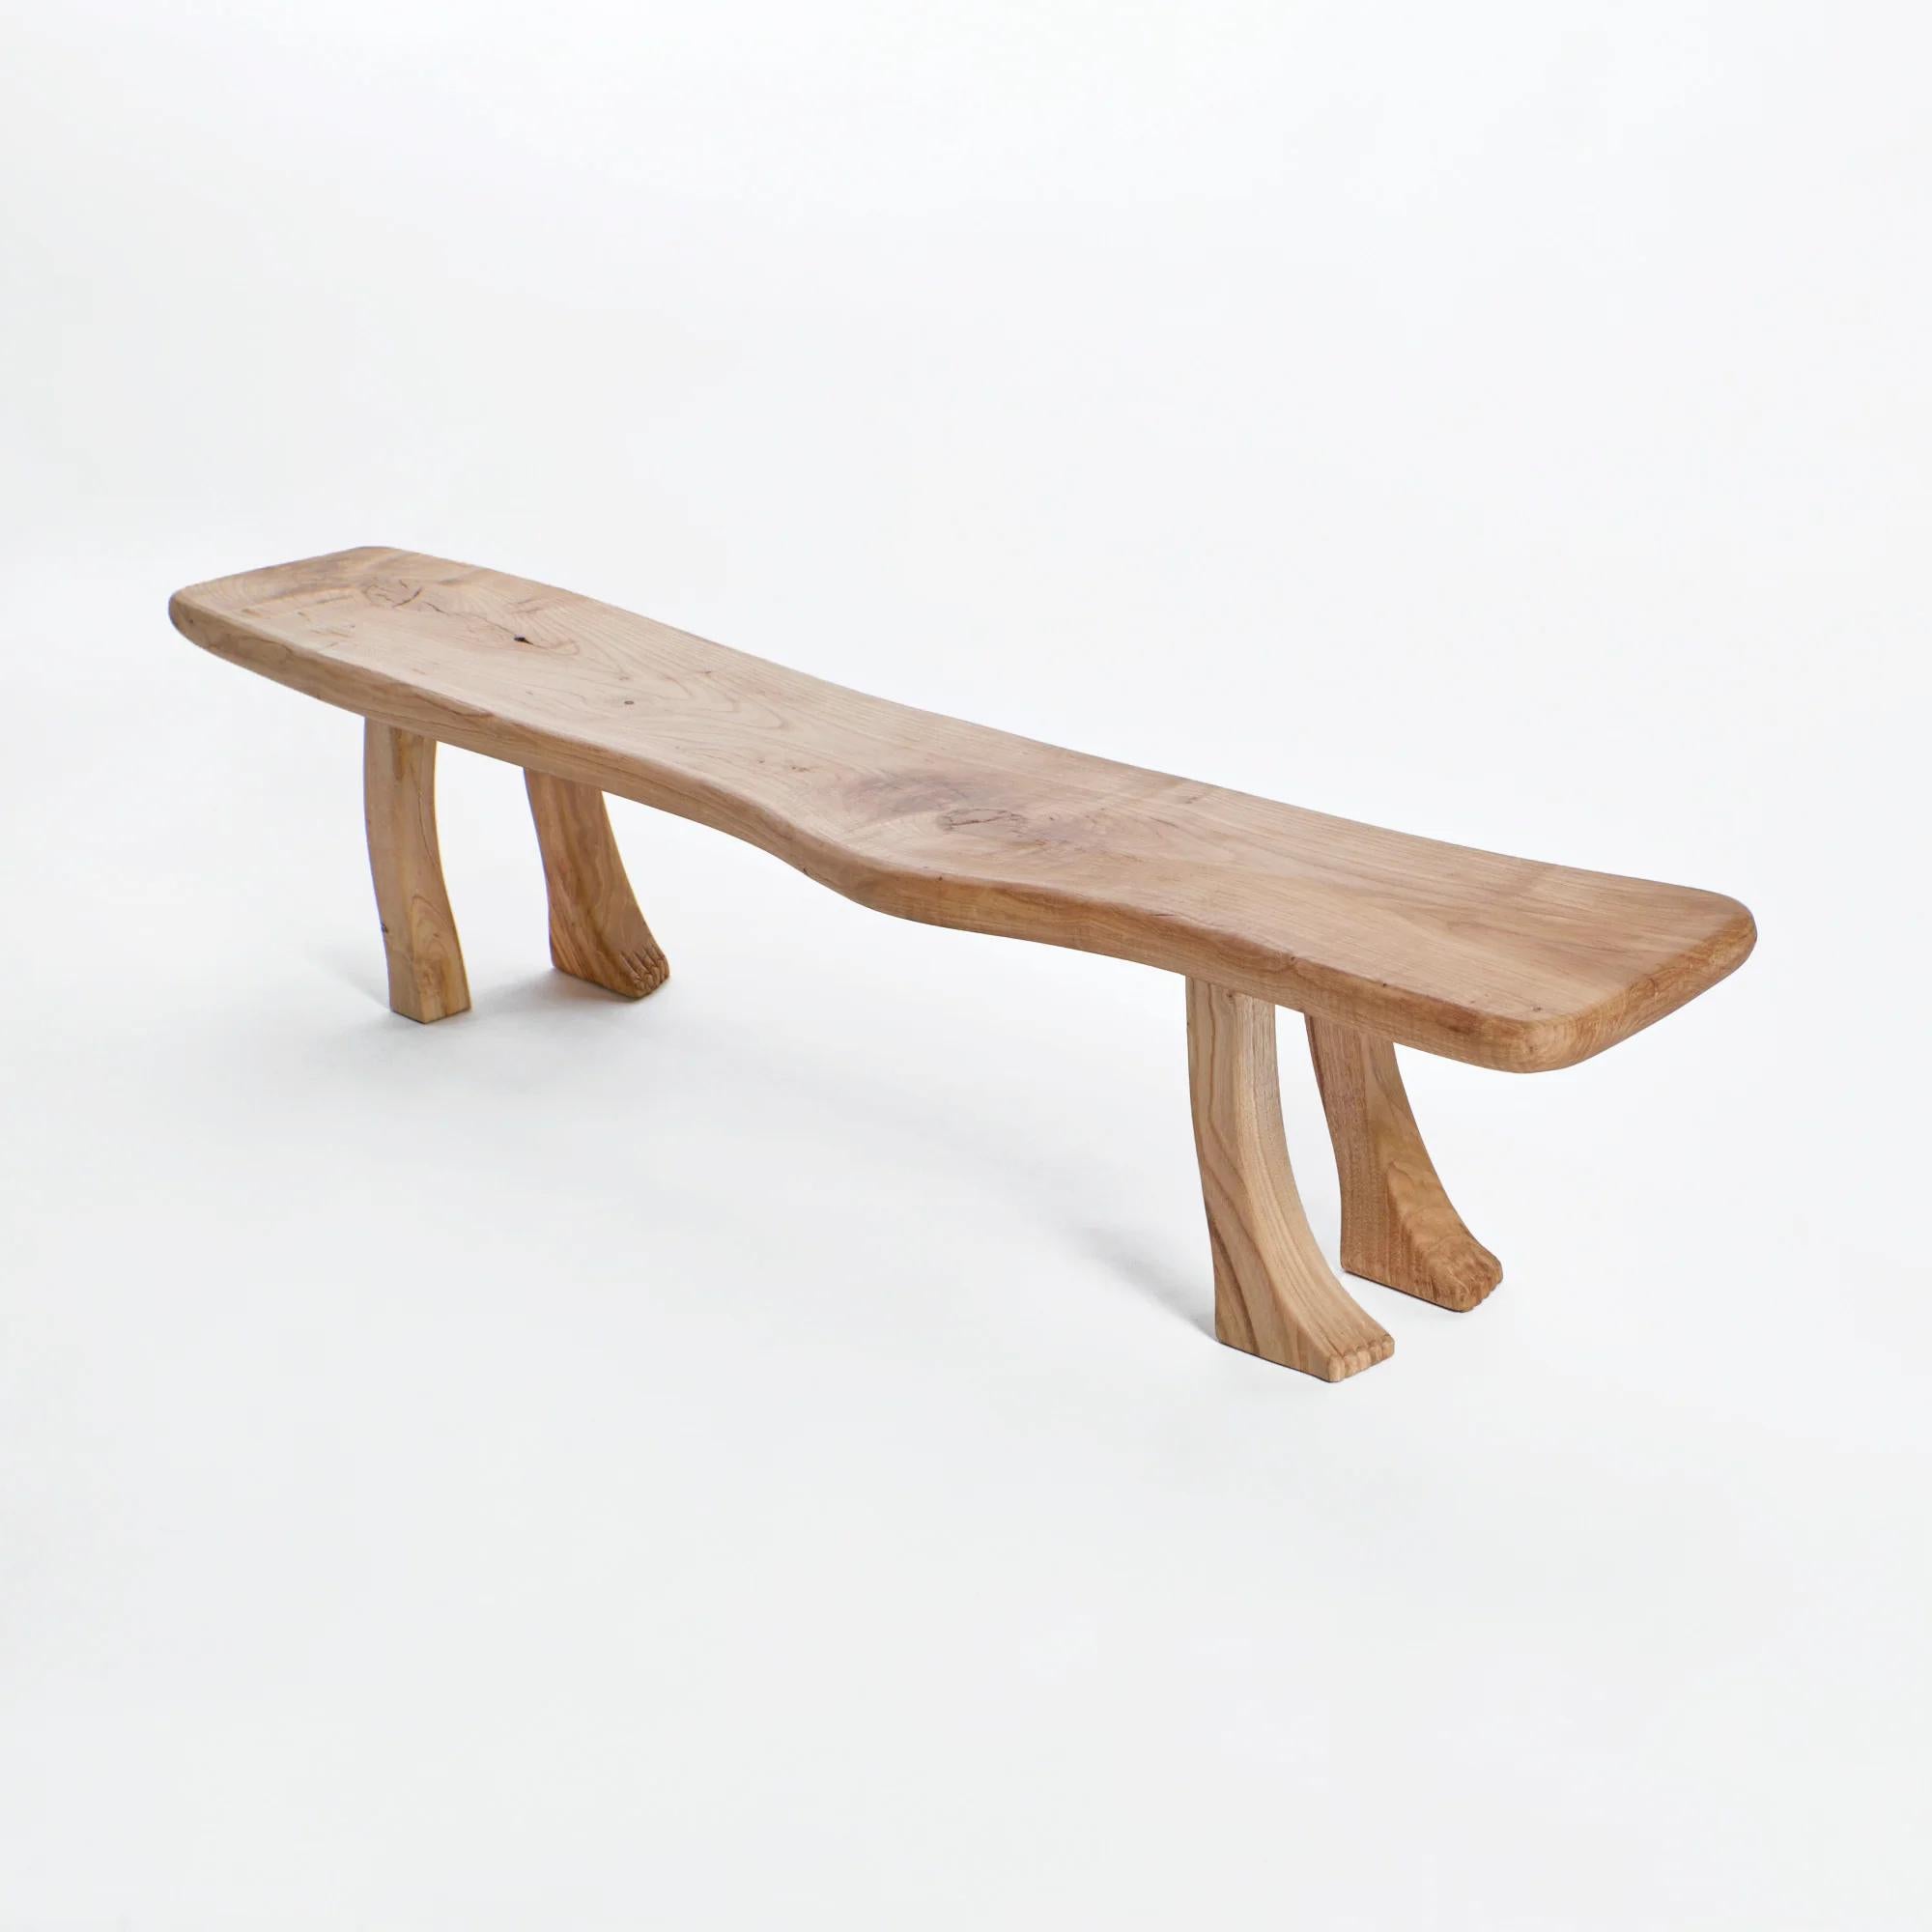 Foot Bench by Project 213A
Dimensions: W 140 x D 27 x H 30 cm
Materials: Chestnut

This playful design is part of Project 213A's hand carved wooden 